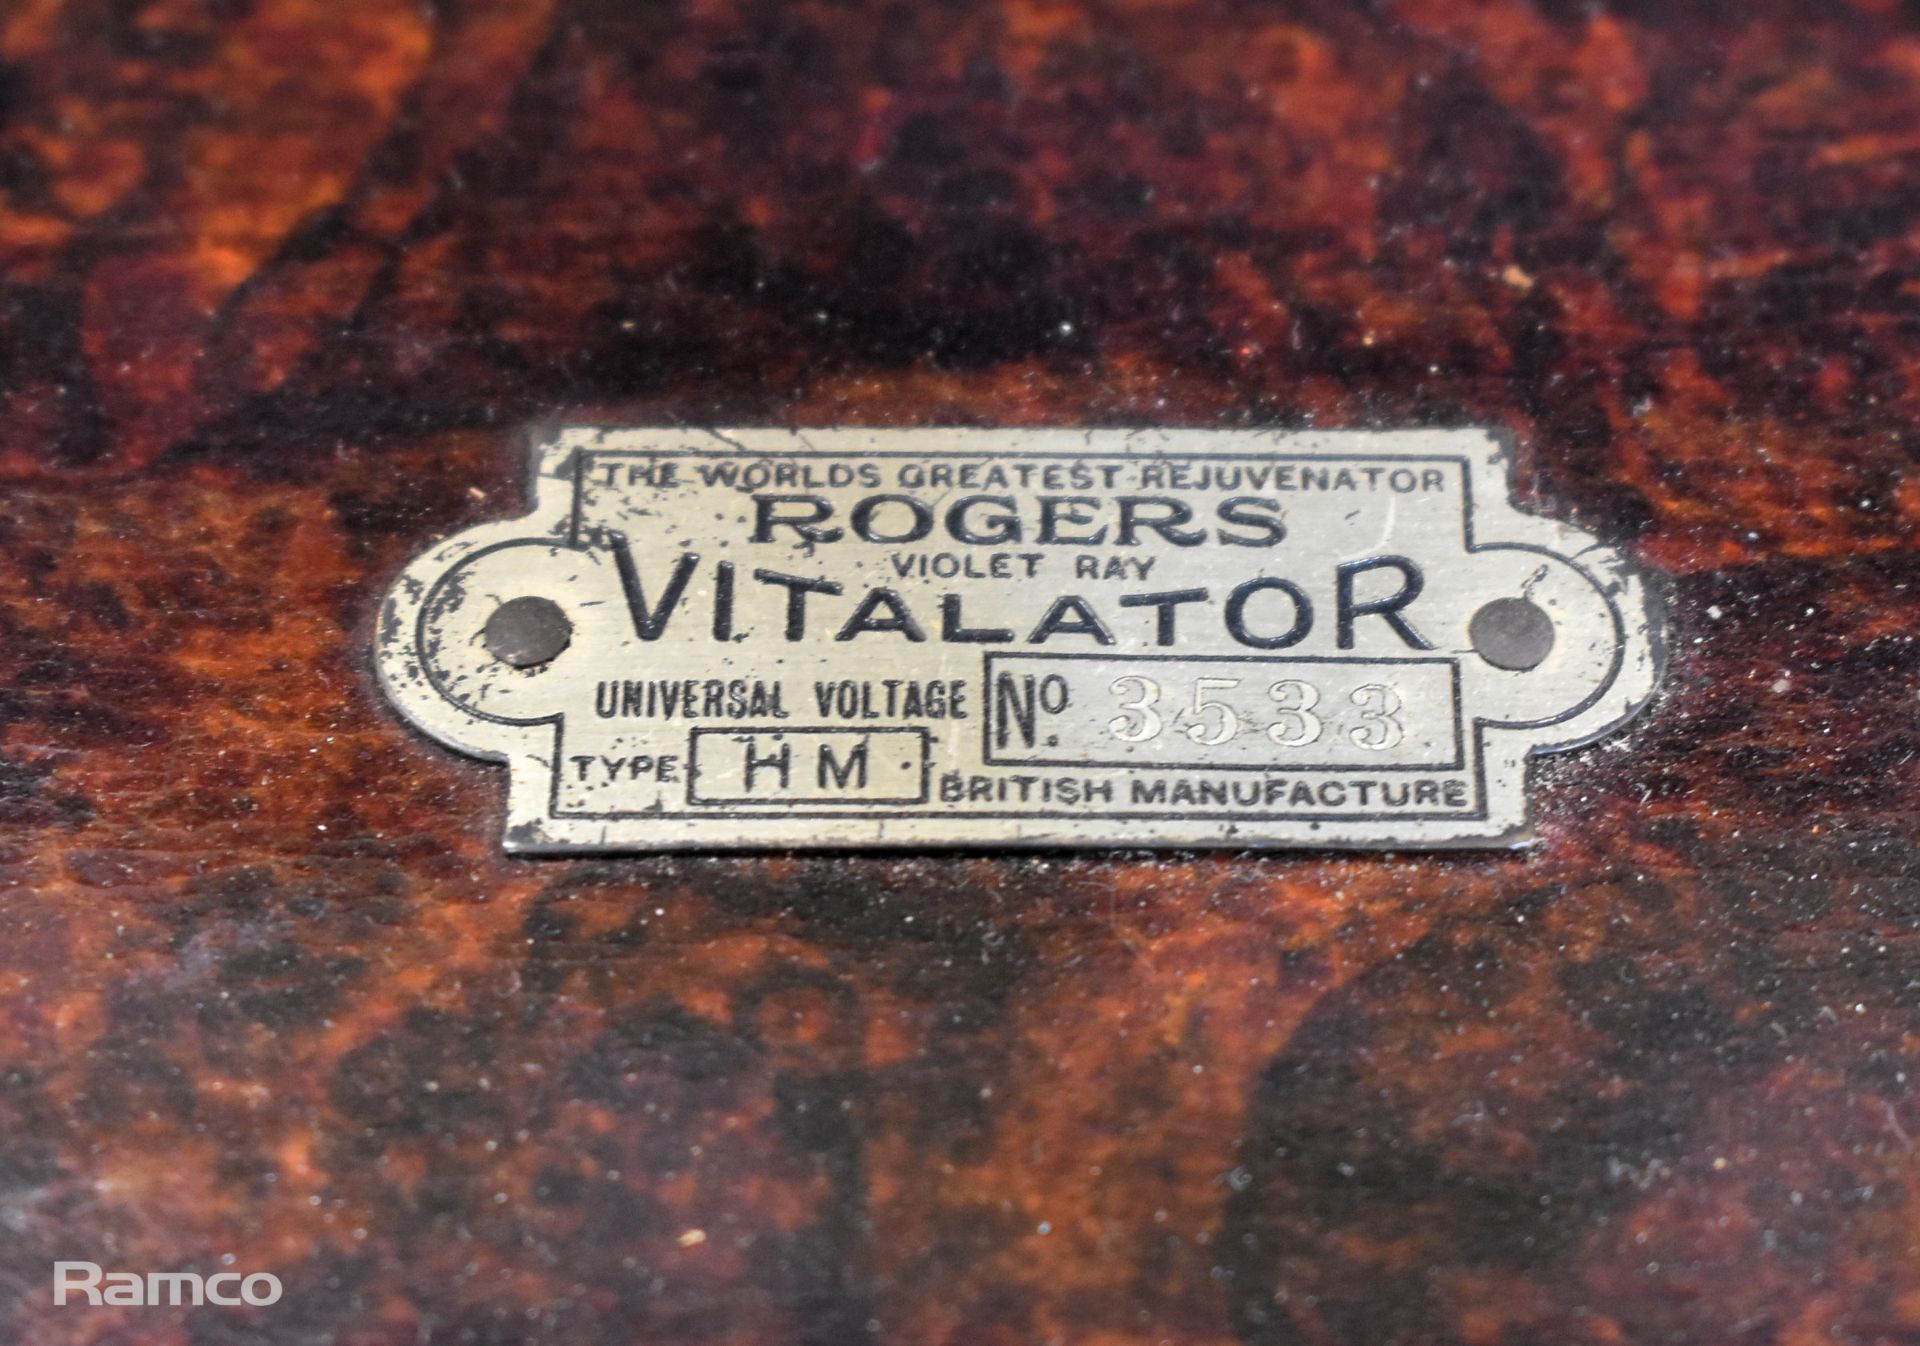 Rogers Violet Ray Vitalator high frequency shock / electrotherapy machine - Image 3 of 8